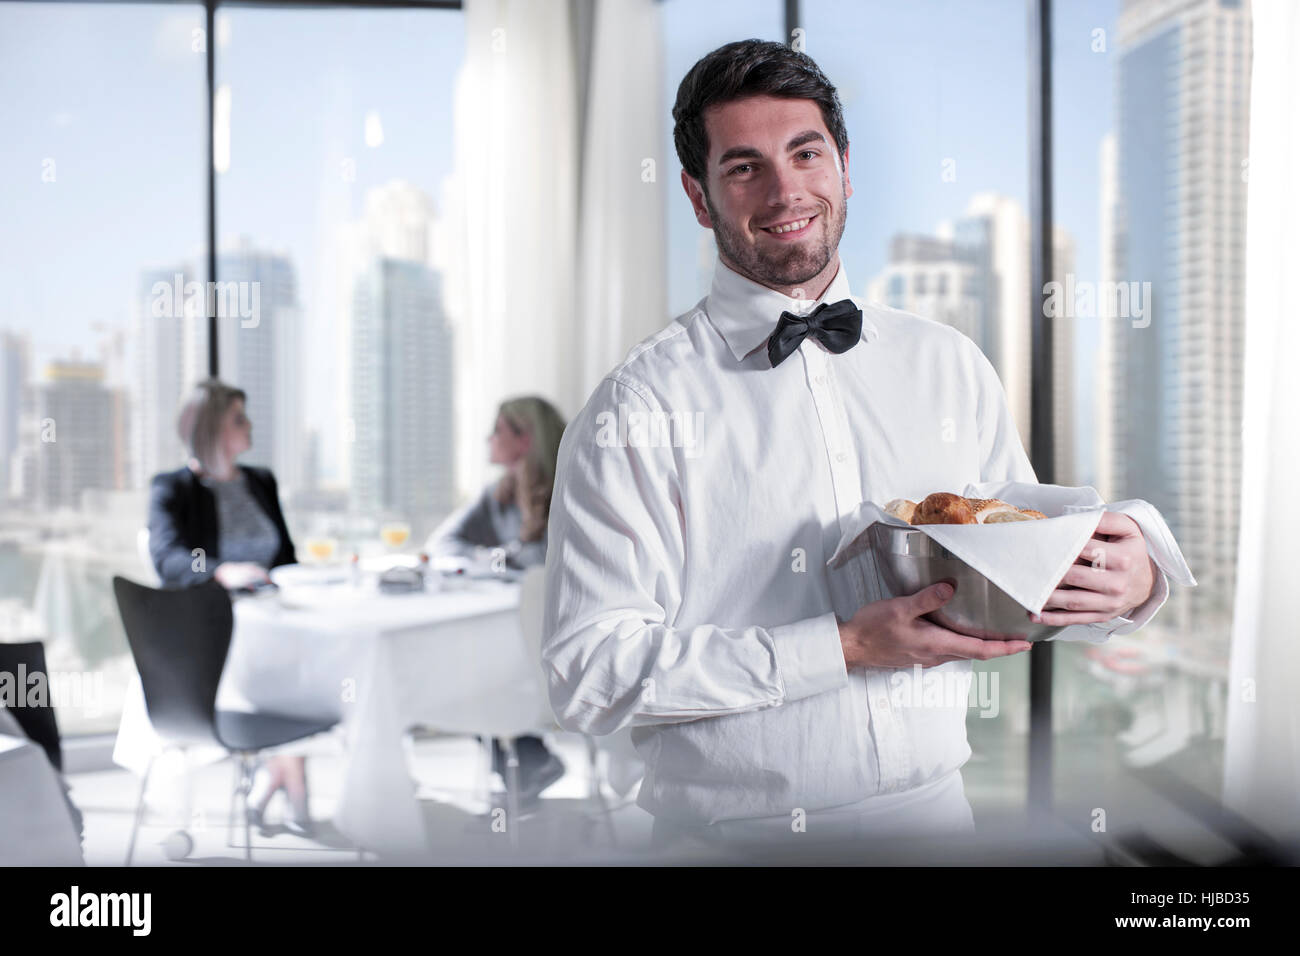 Portrait of young male waiter in hotel restaurant Stock Photo